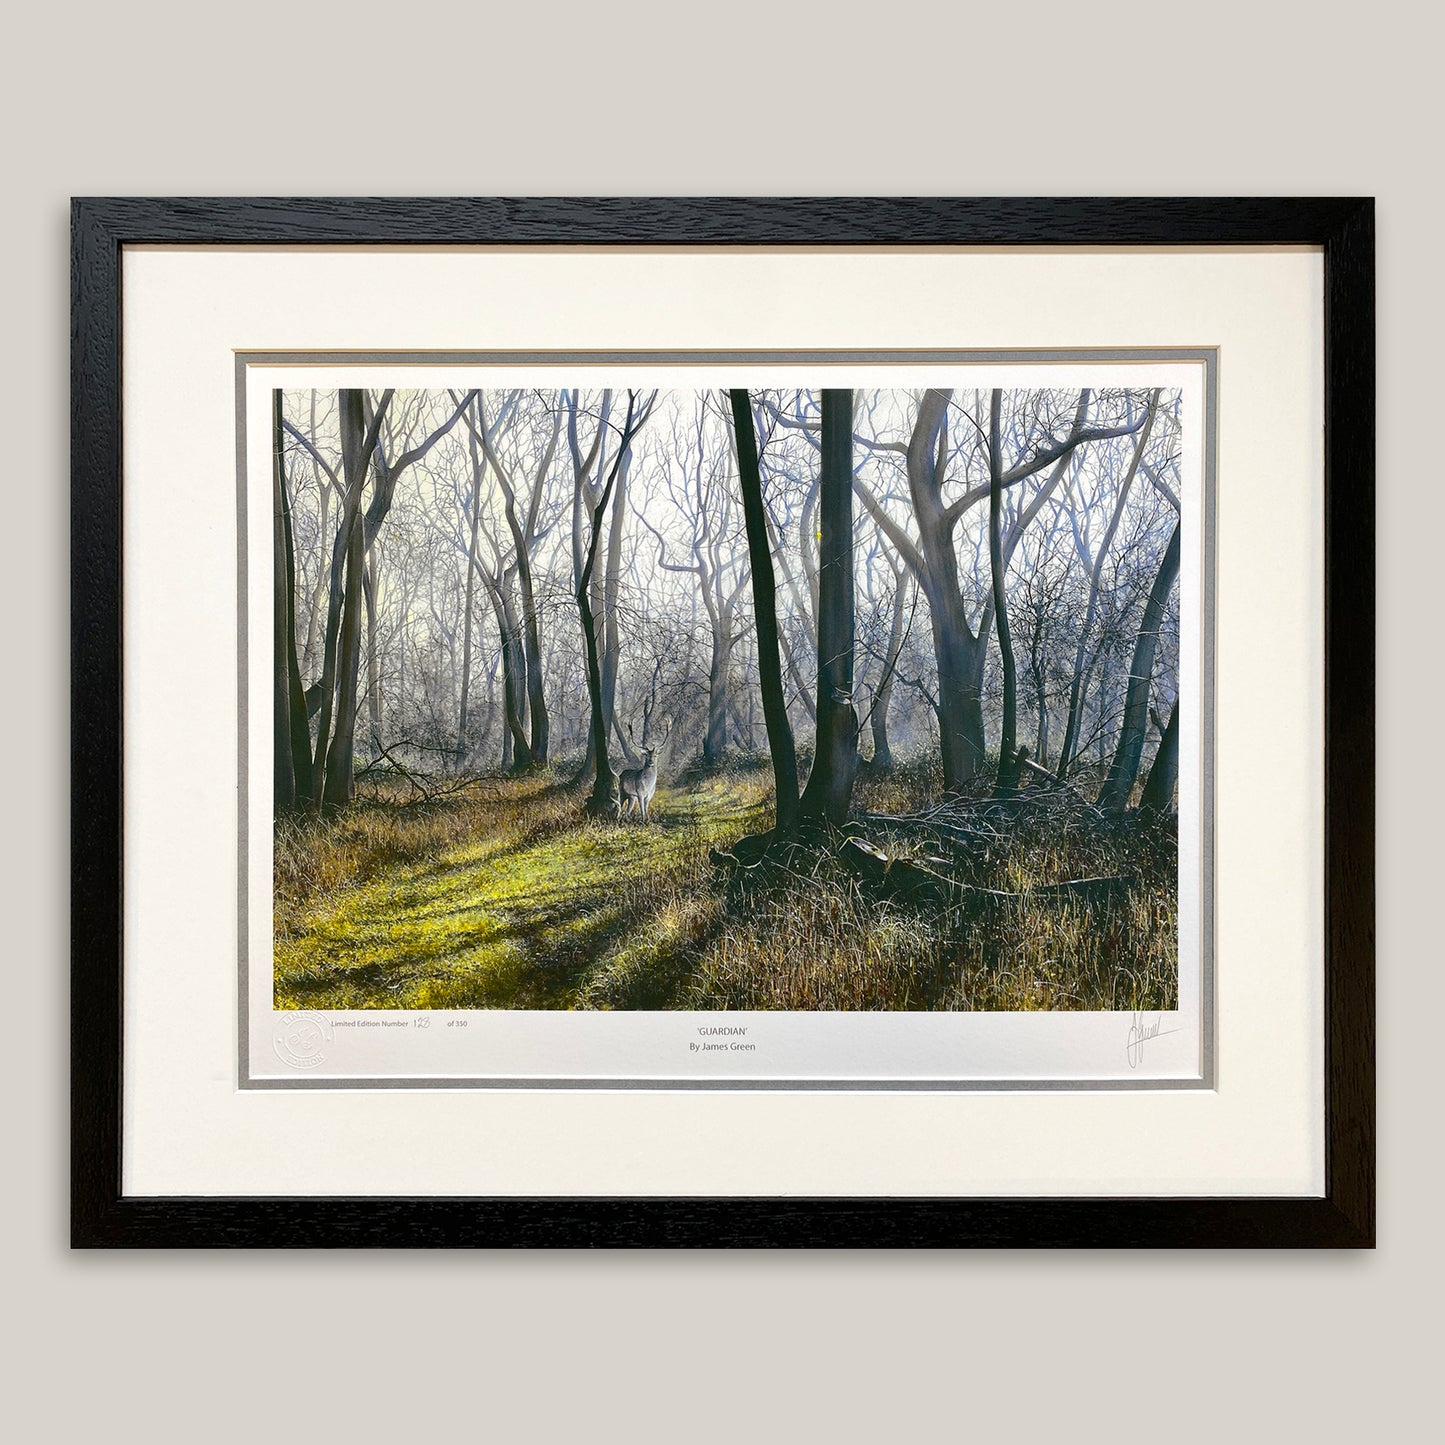 painting of a forest by James Green in a black frame